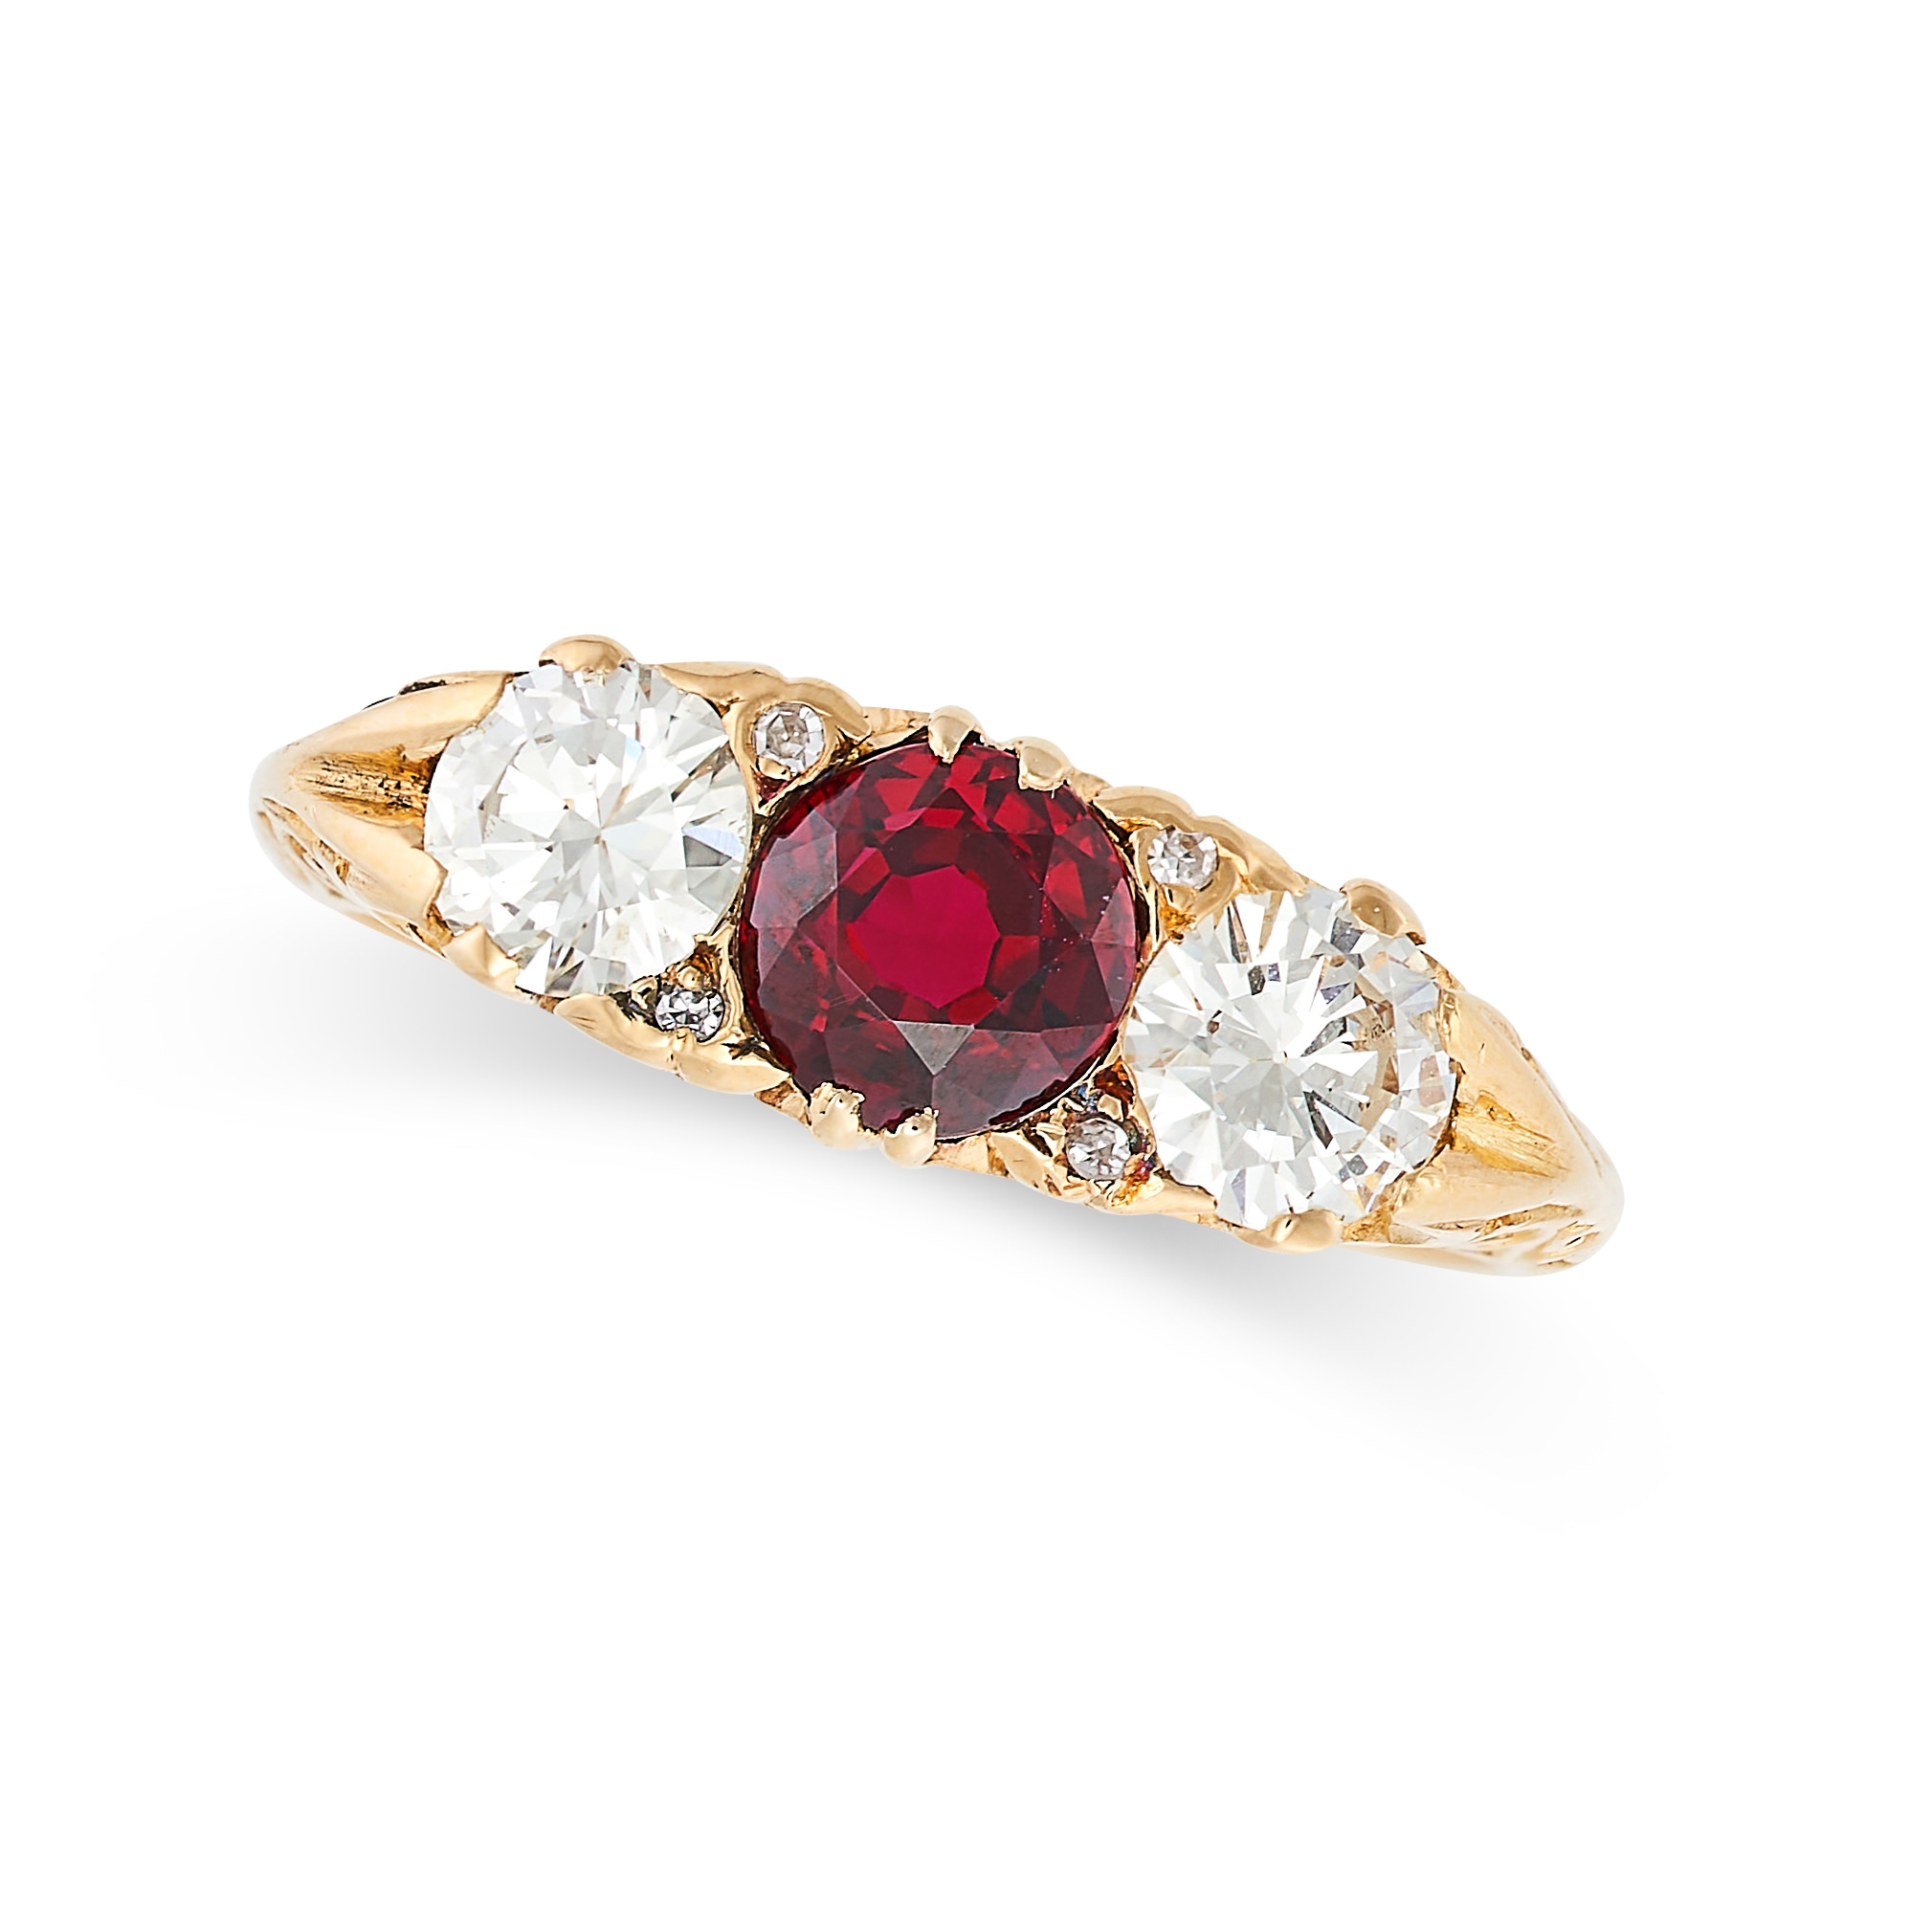 A RUBY AND DIAMOND RING in 18ct yellow gold, set with a round cut ruby of 0.97 carats between two